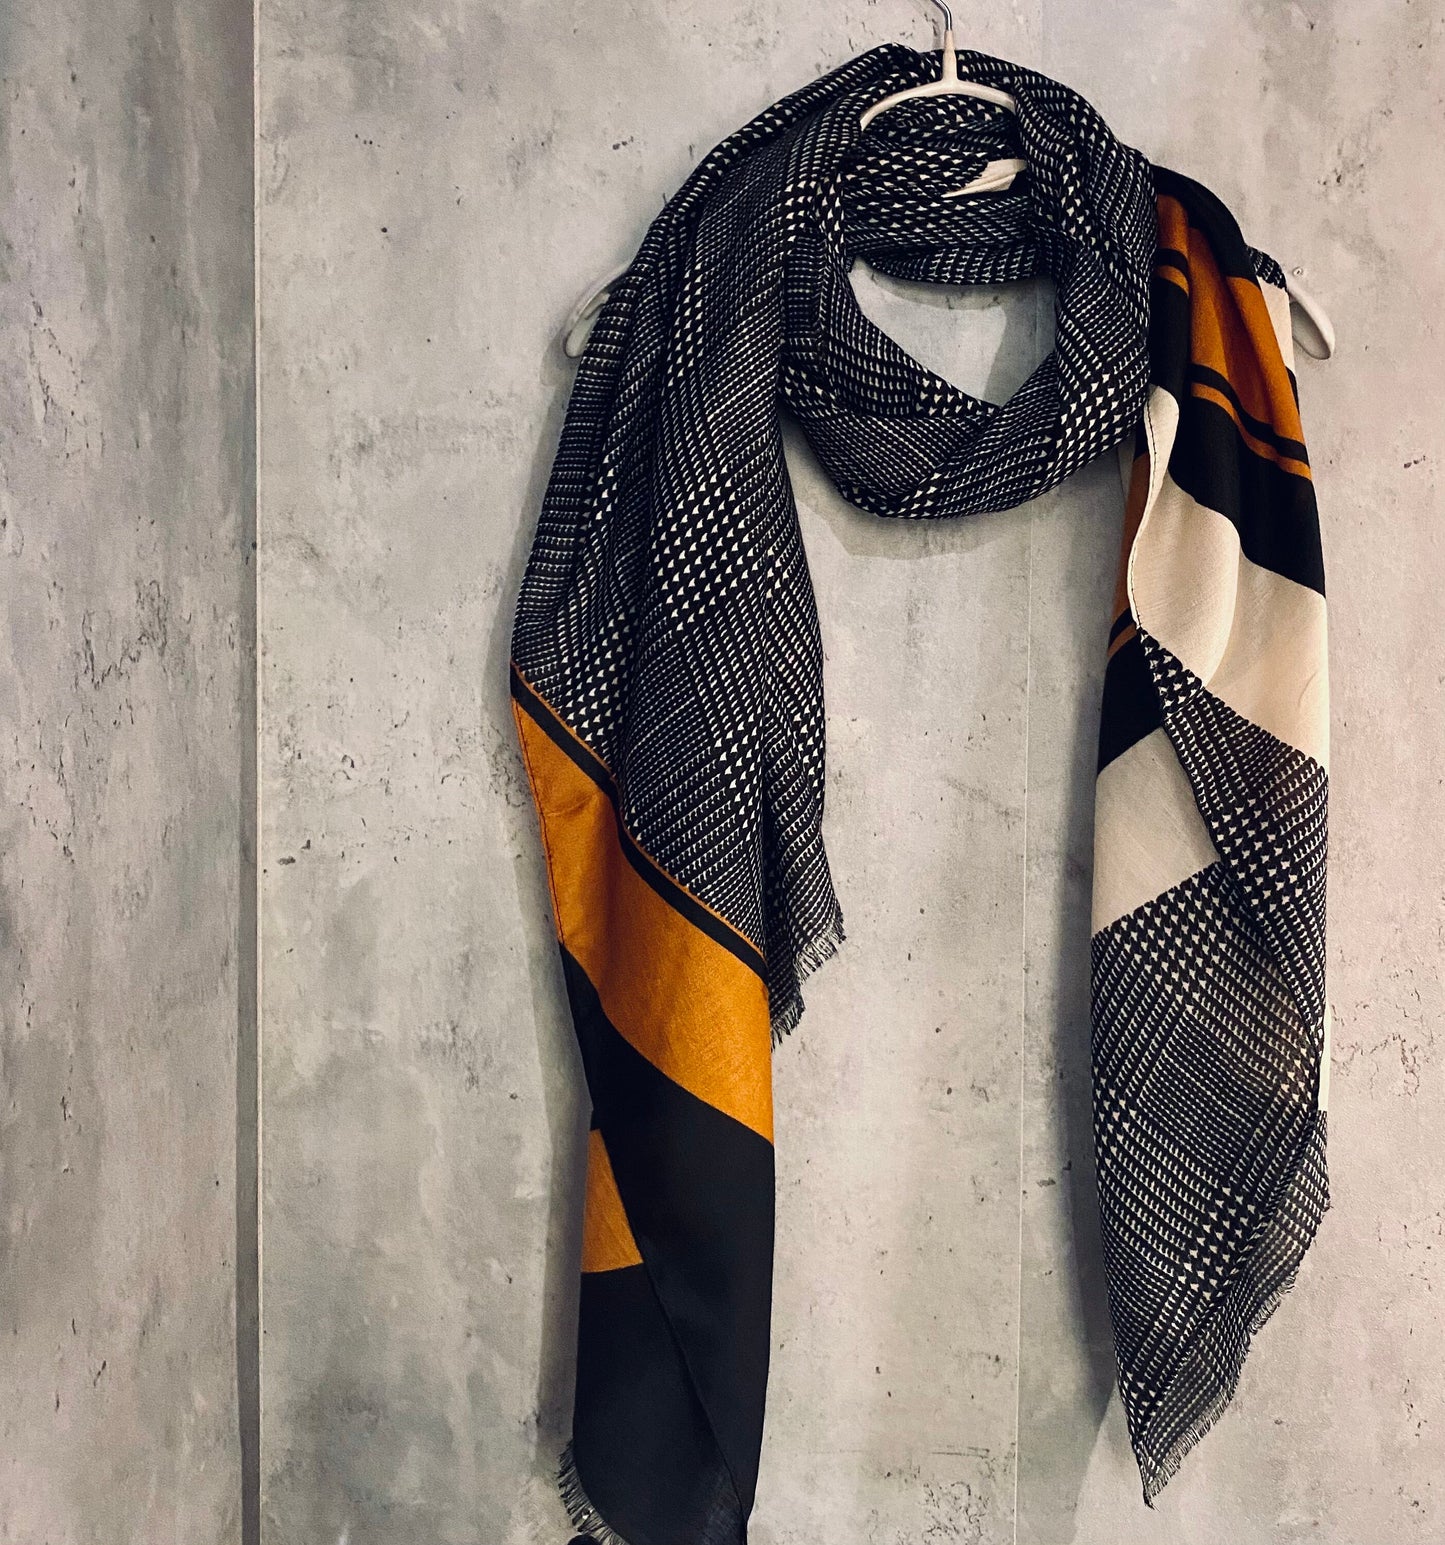 Plaid Pattern With Brown Trim Black Cotton Scarf/Summer Autumn Scarf/Gifts For Mom/Gifts For Her Birthday Christmas/Scarf Women/UK Seller